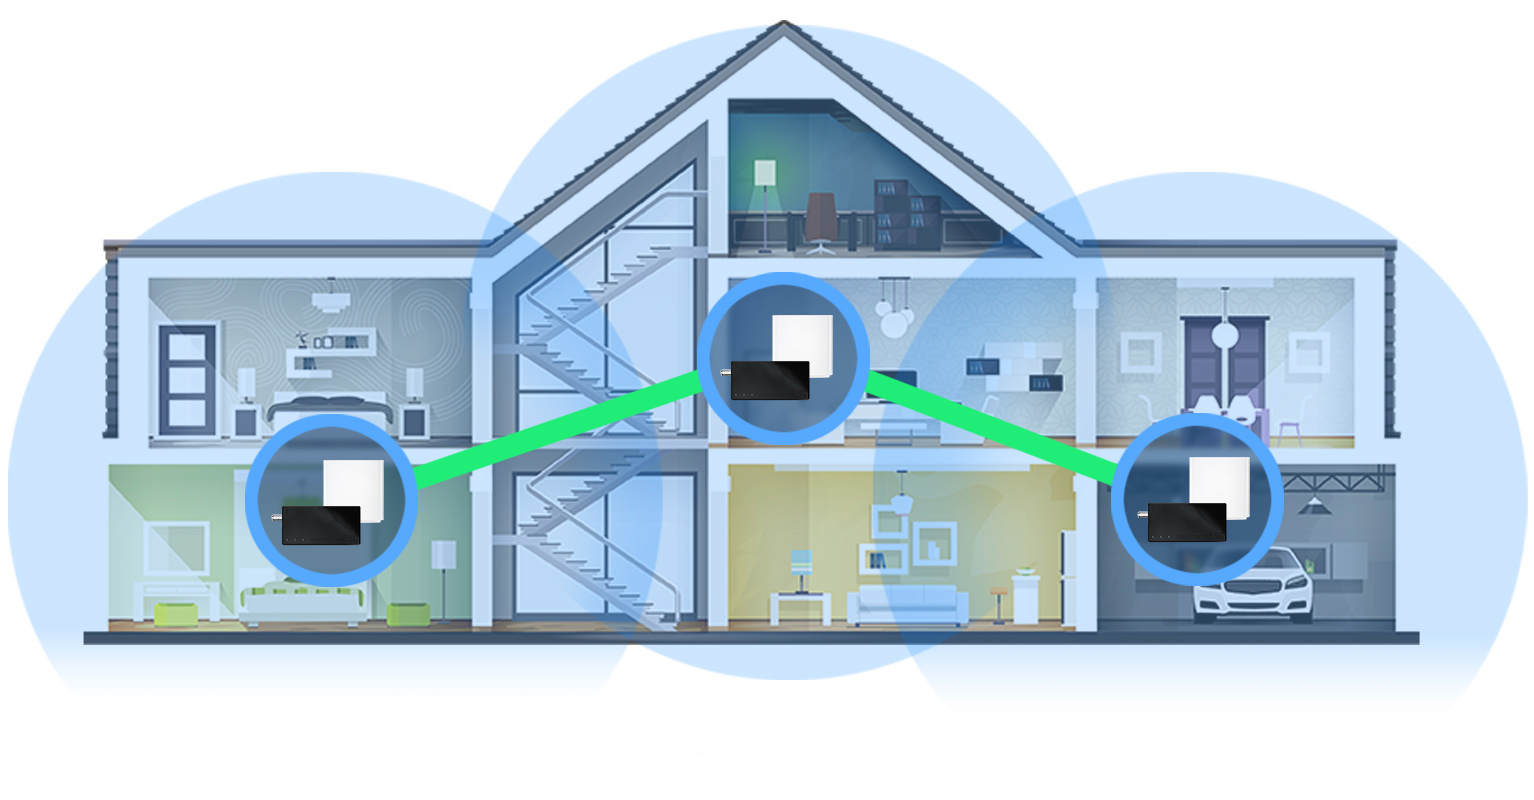 mesh system installed in 3 rooms with MA-25, blue circle represent wifi coverage